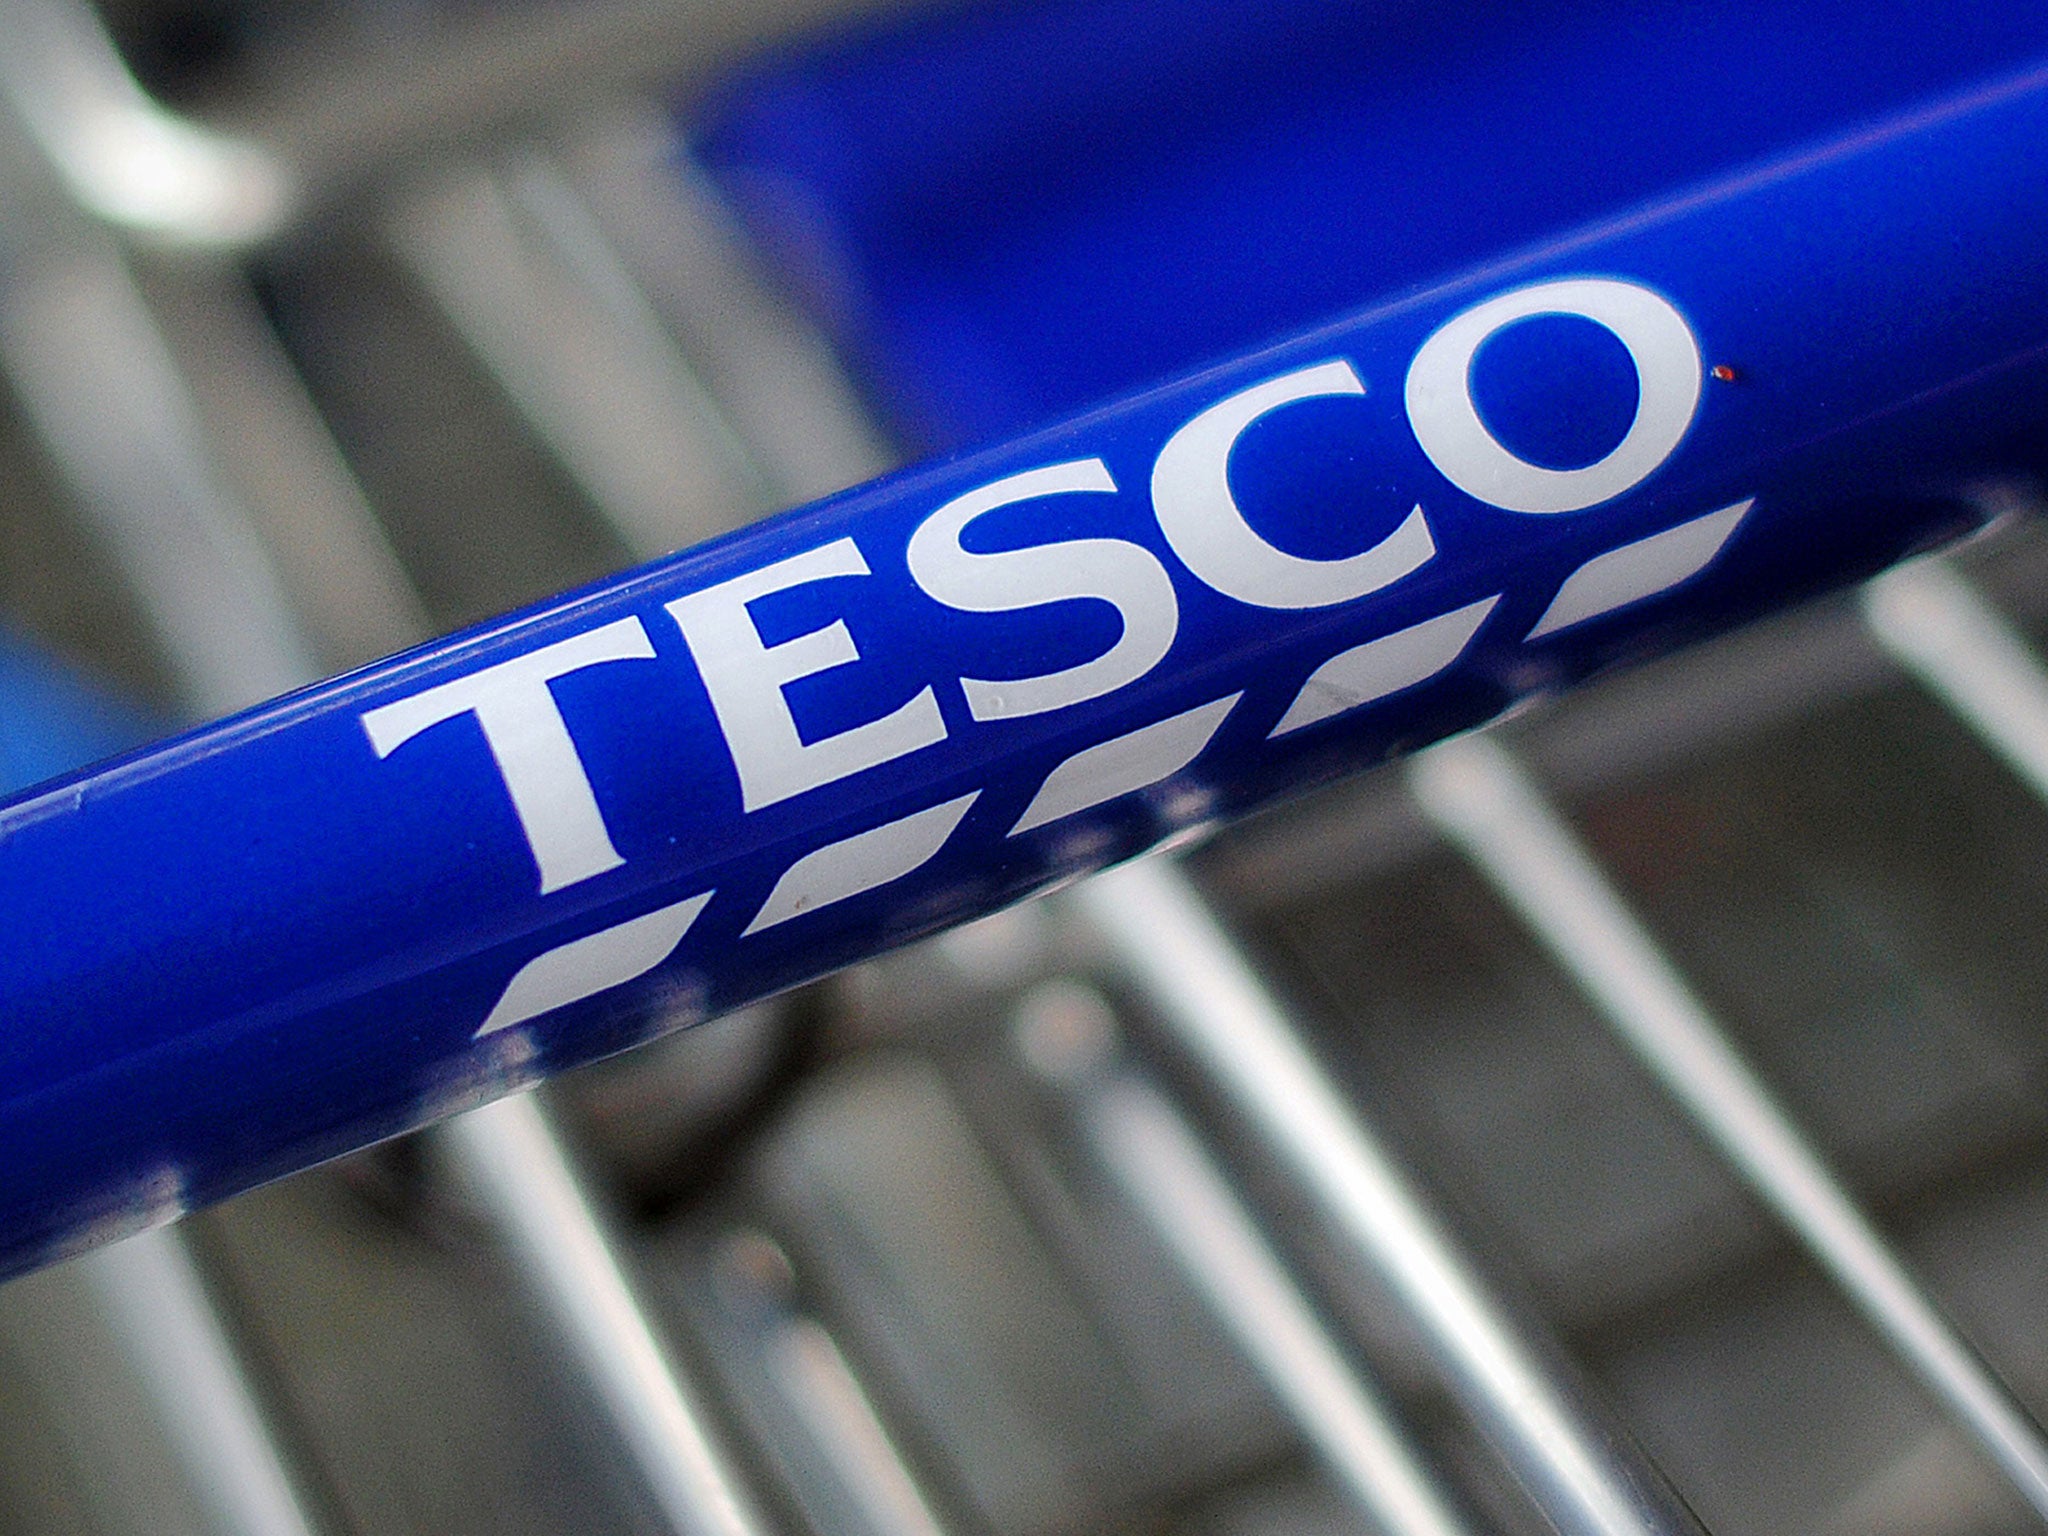 Tesco own-brand ice creams were withdrawn from sale after they were found to contain painkiller tablets; according to police, this may have been done deliberately